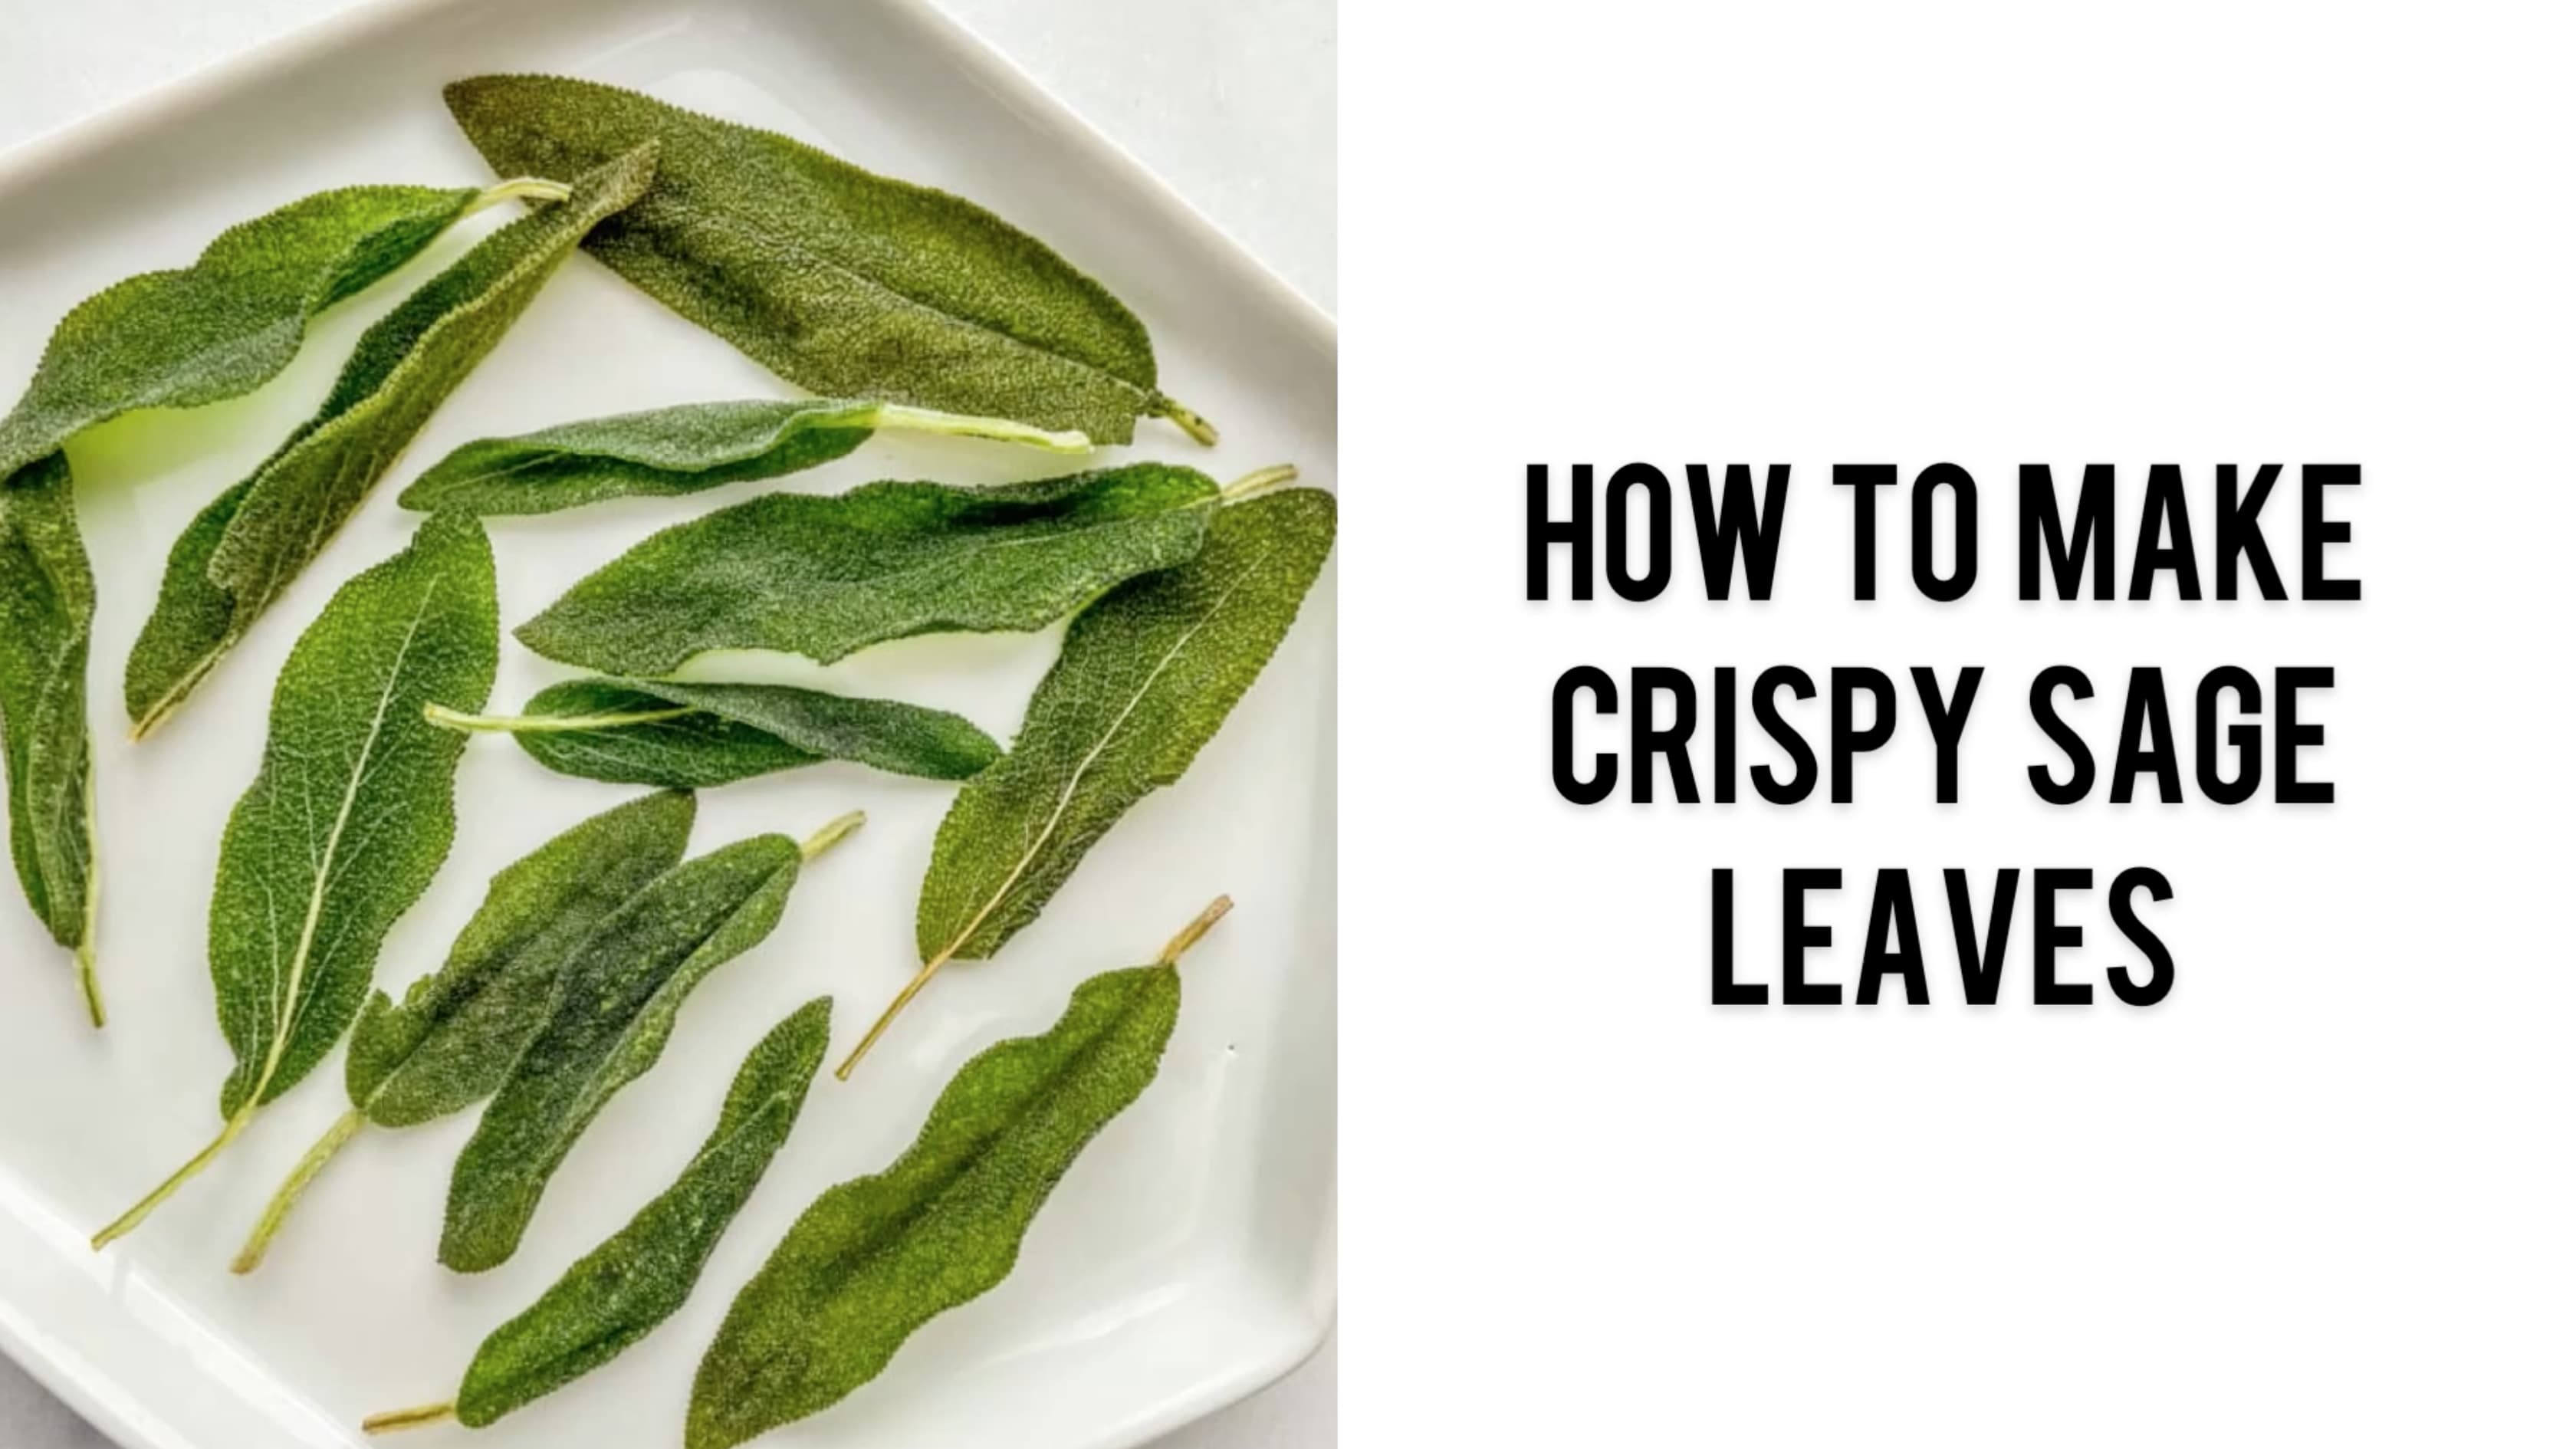 Crispy Sage Leaves - This Healthy Table